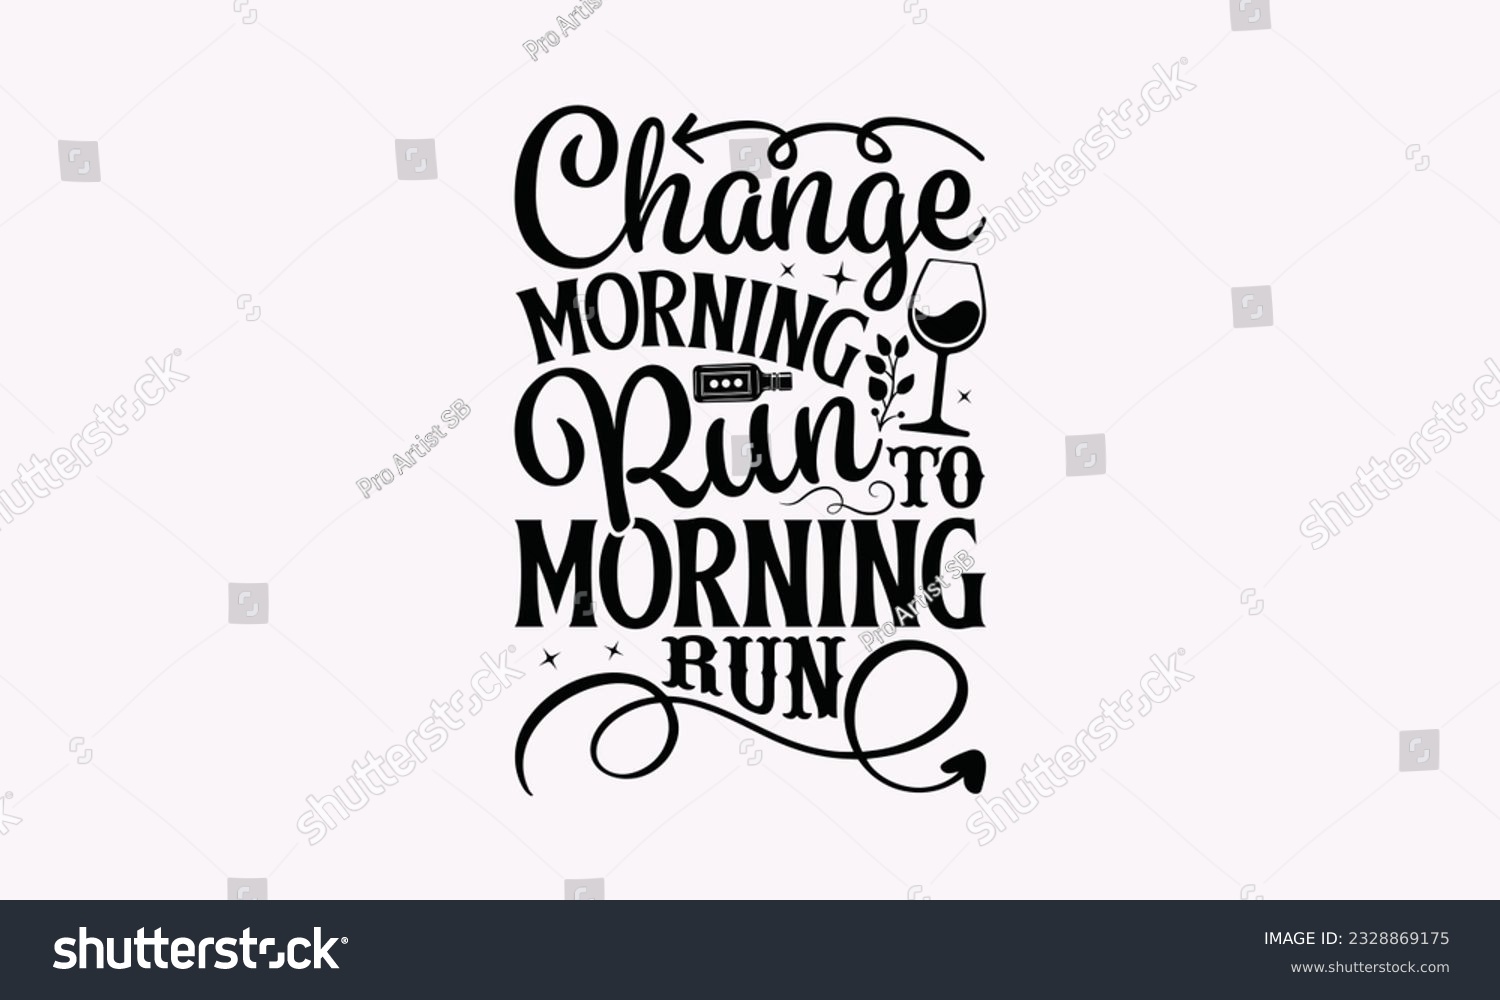 SVG of Change Morning Run To Morning Run - Alcohol SVG Design, Cheer Quotes, Hand drawn lettering phrase, Isolated on white background. svg